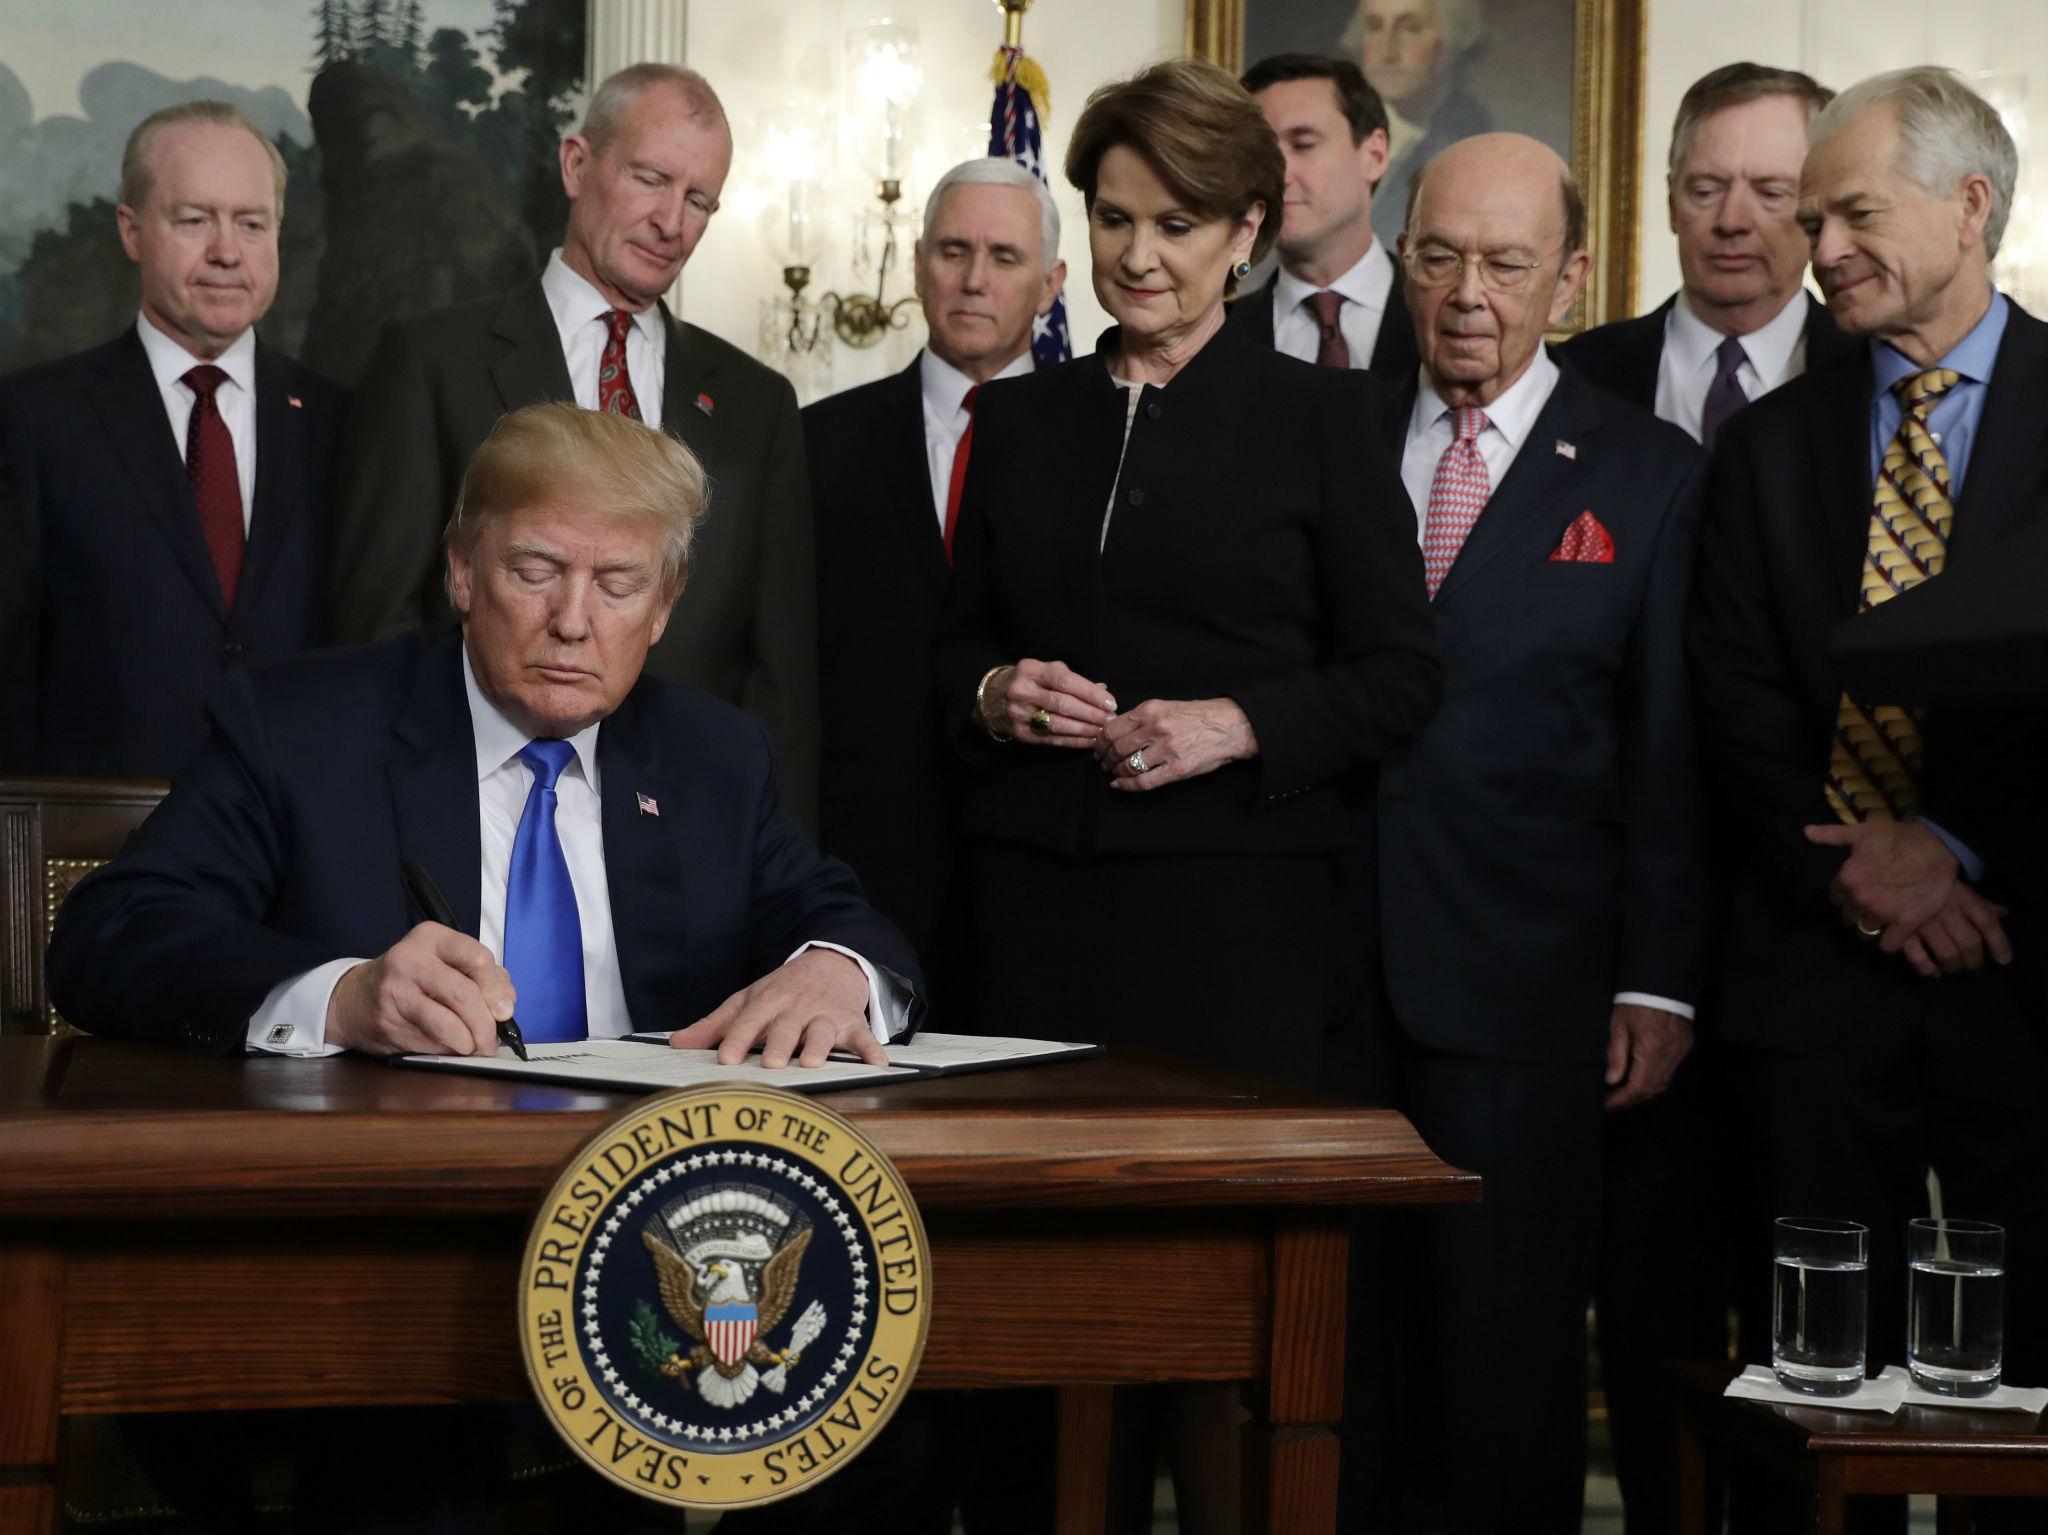 March 22: Donald Trump signs a presidential memorandum imposing tariffs and investment restrictions on China